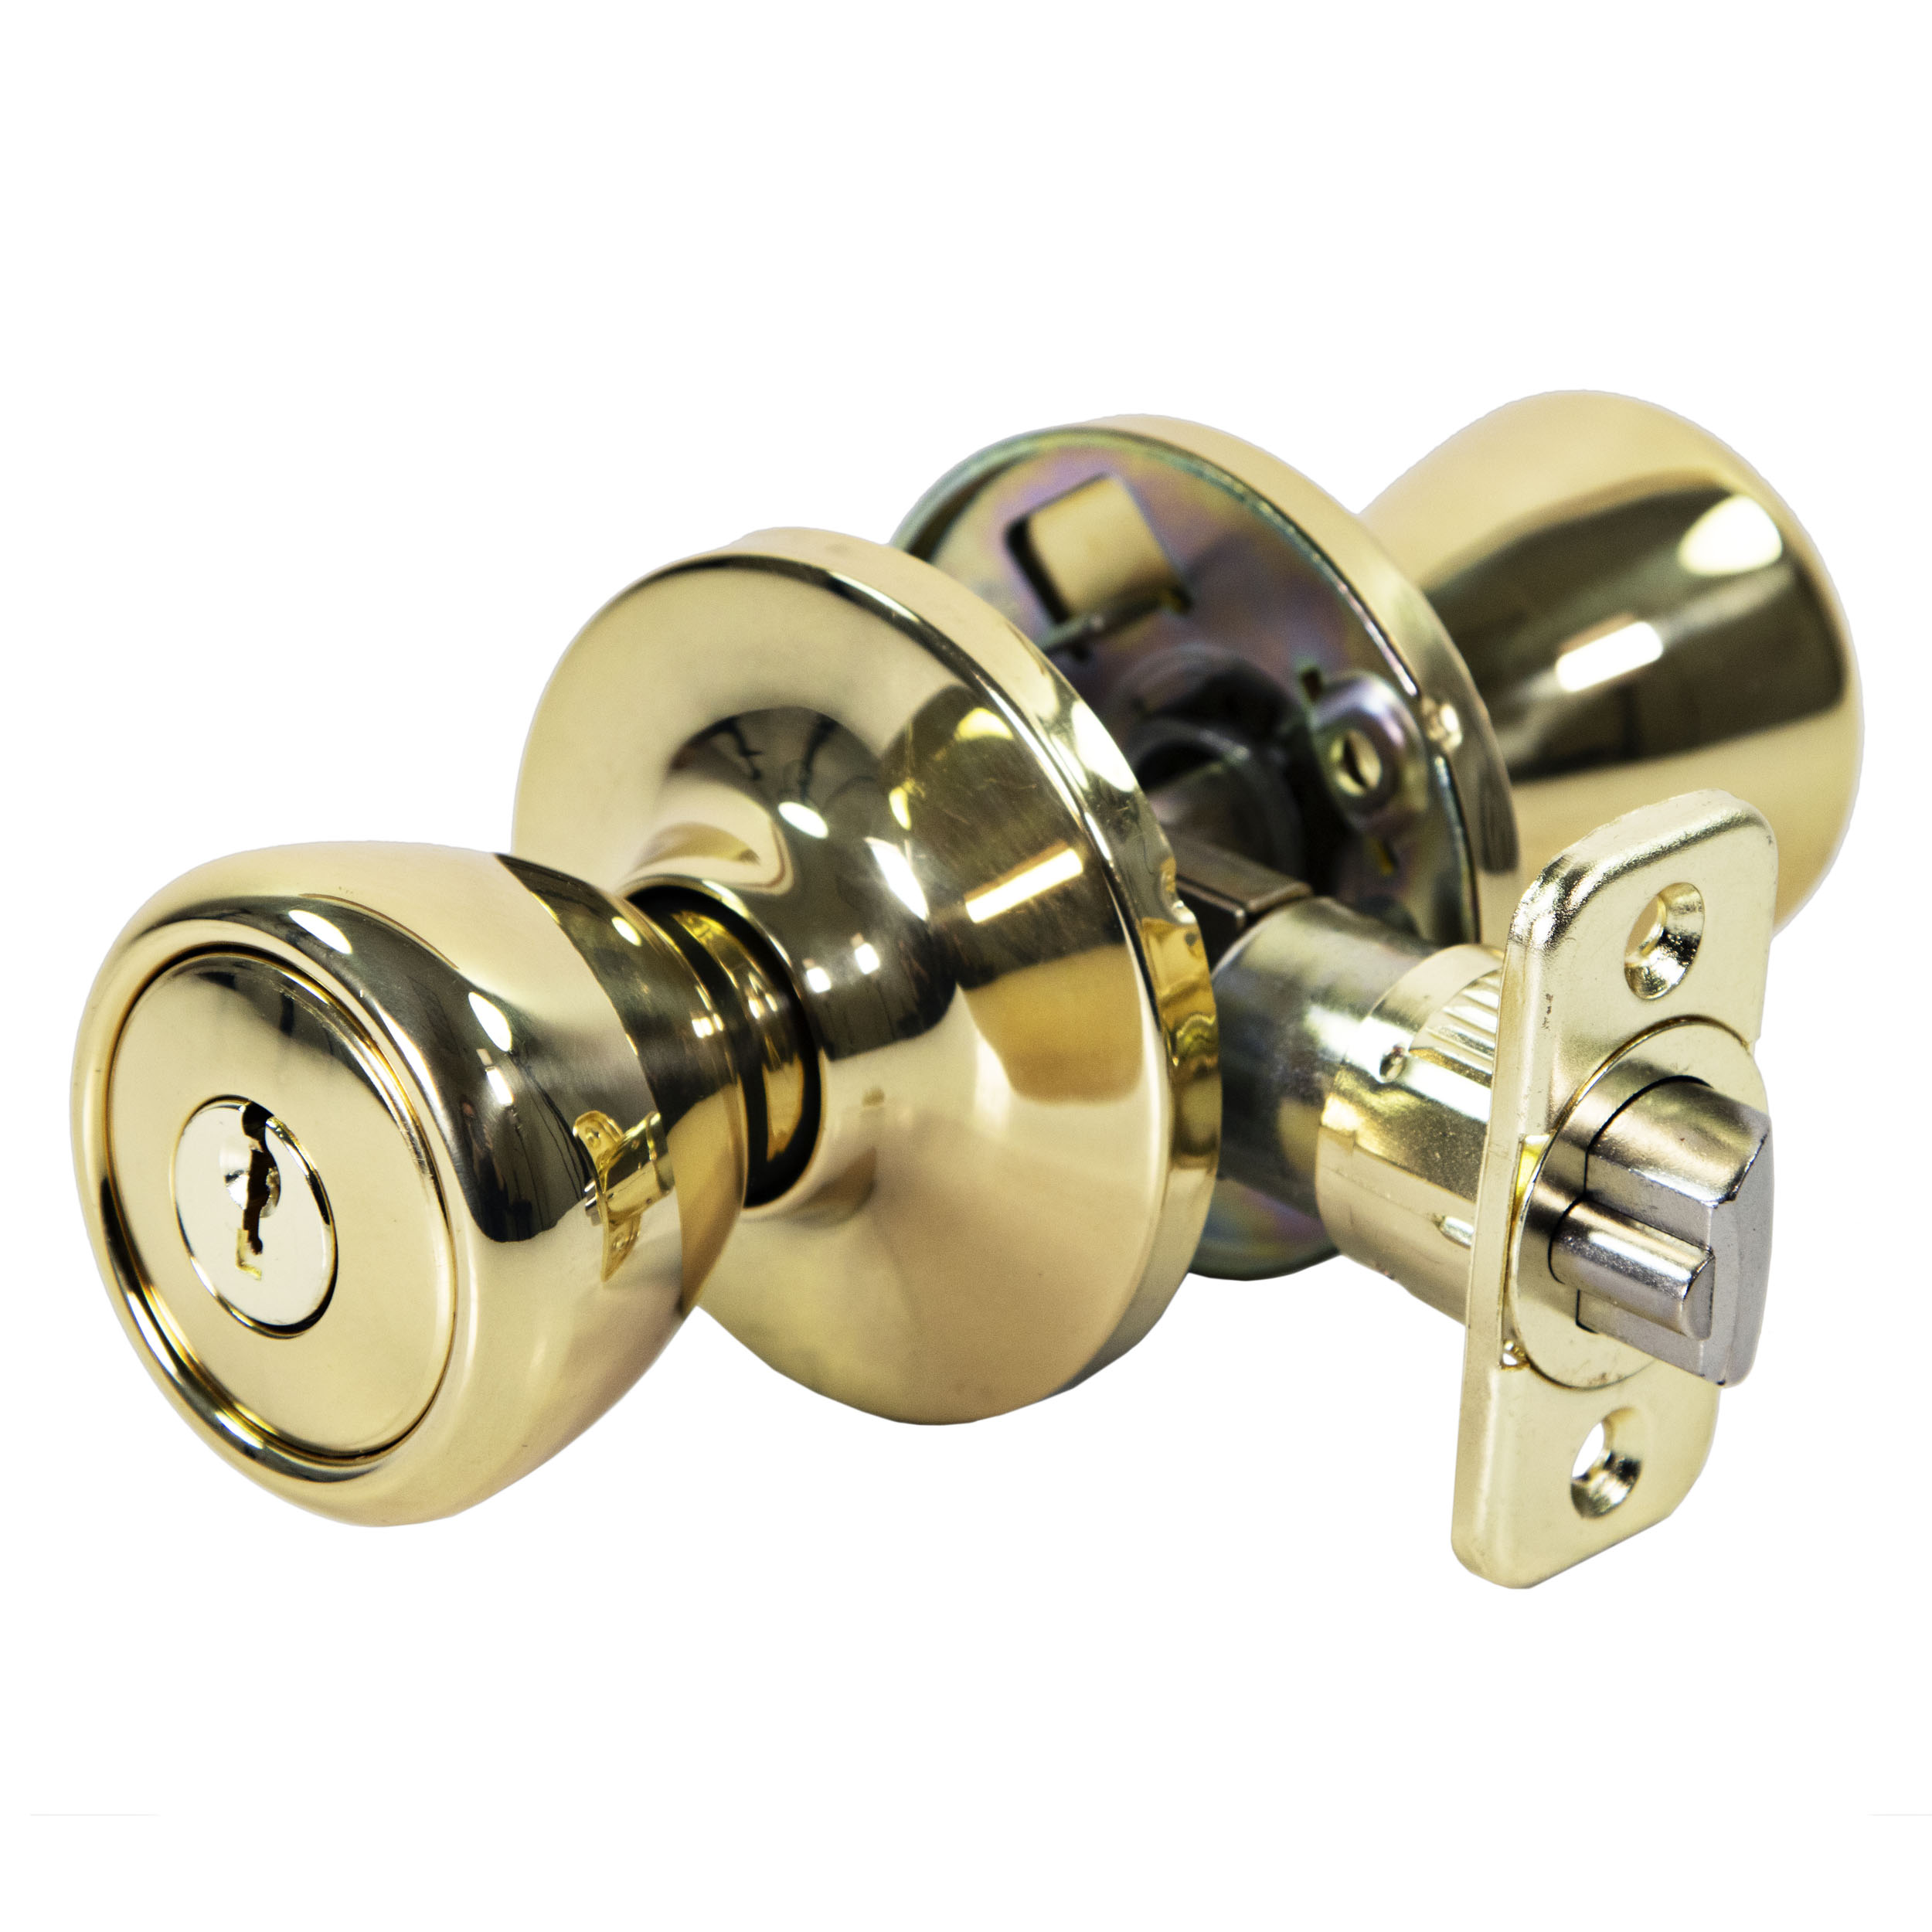 Ultra Security Rittenhouse Keyed Entry with Deadbolt Tulip Door Knob - Security Keyed Entry with Deadbolt Lockset, KW1 Keyed Entry, Fits 1-3/8" To 1-3/4" Thick Door (Polished Brass Finish, 1 Pack) - image 5 of 10